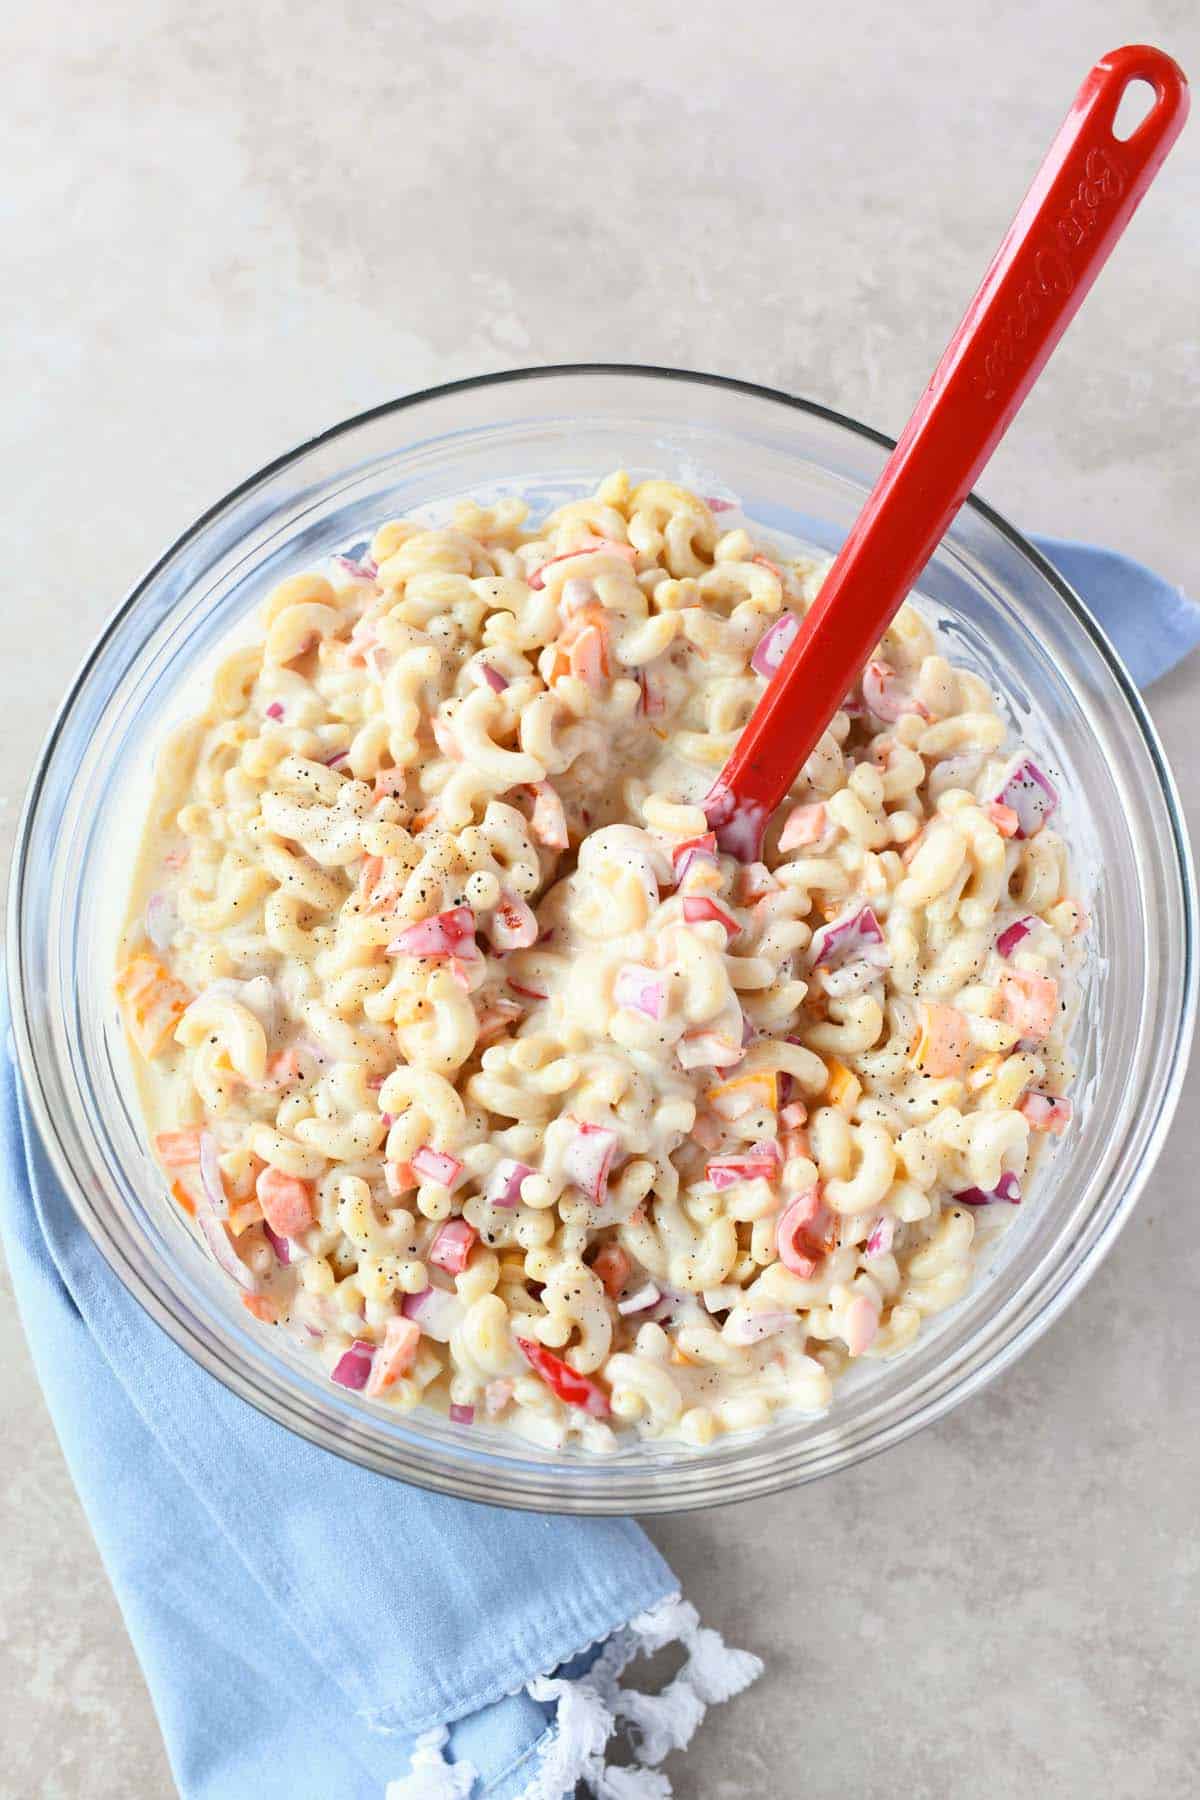 Sweet Macaroni Salad in a bowl with a red spoon.